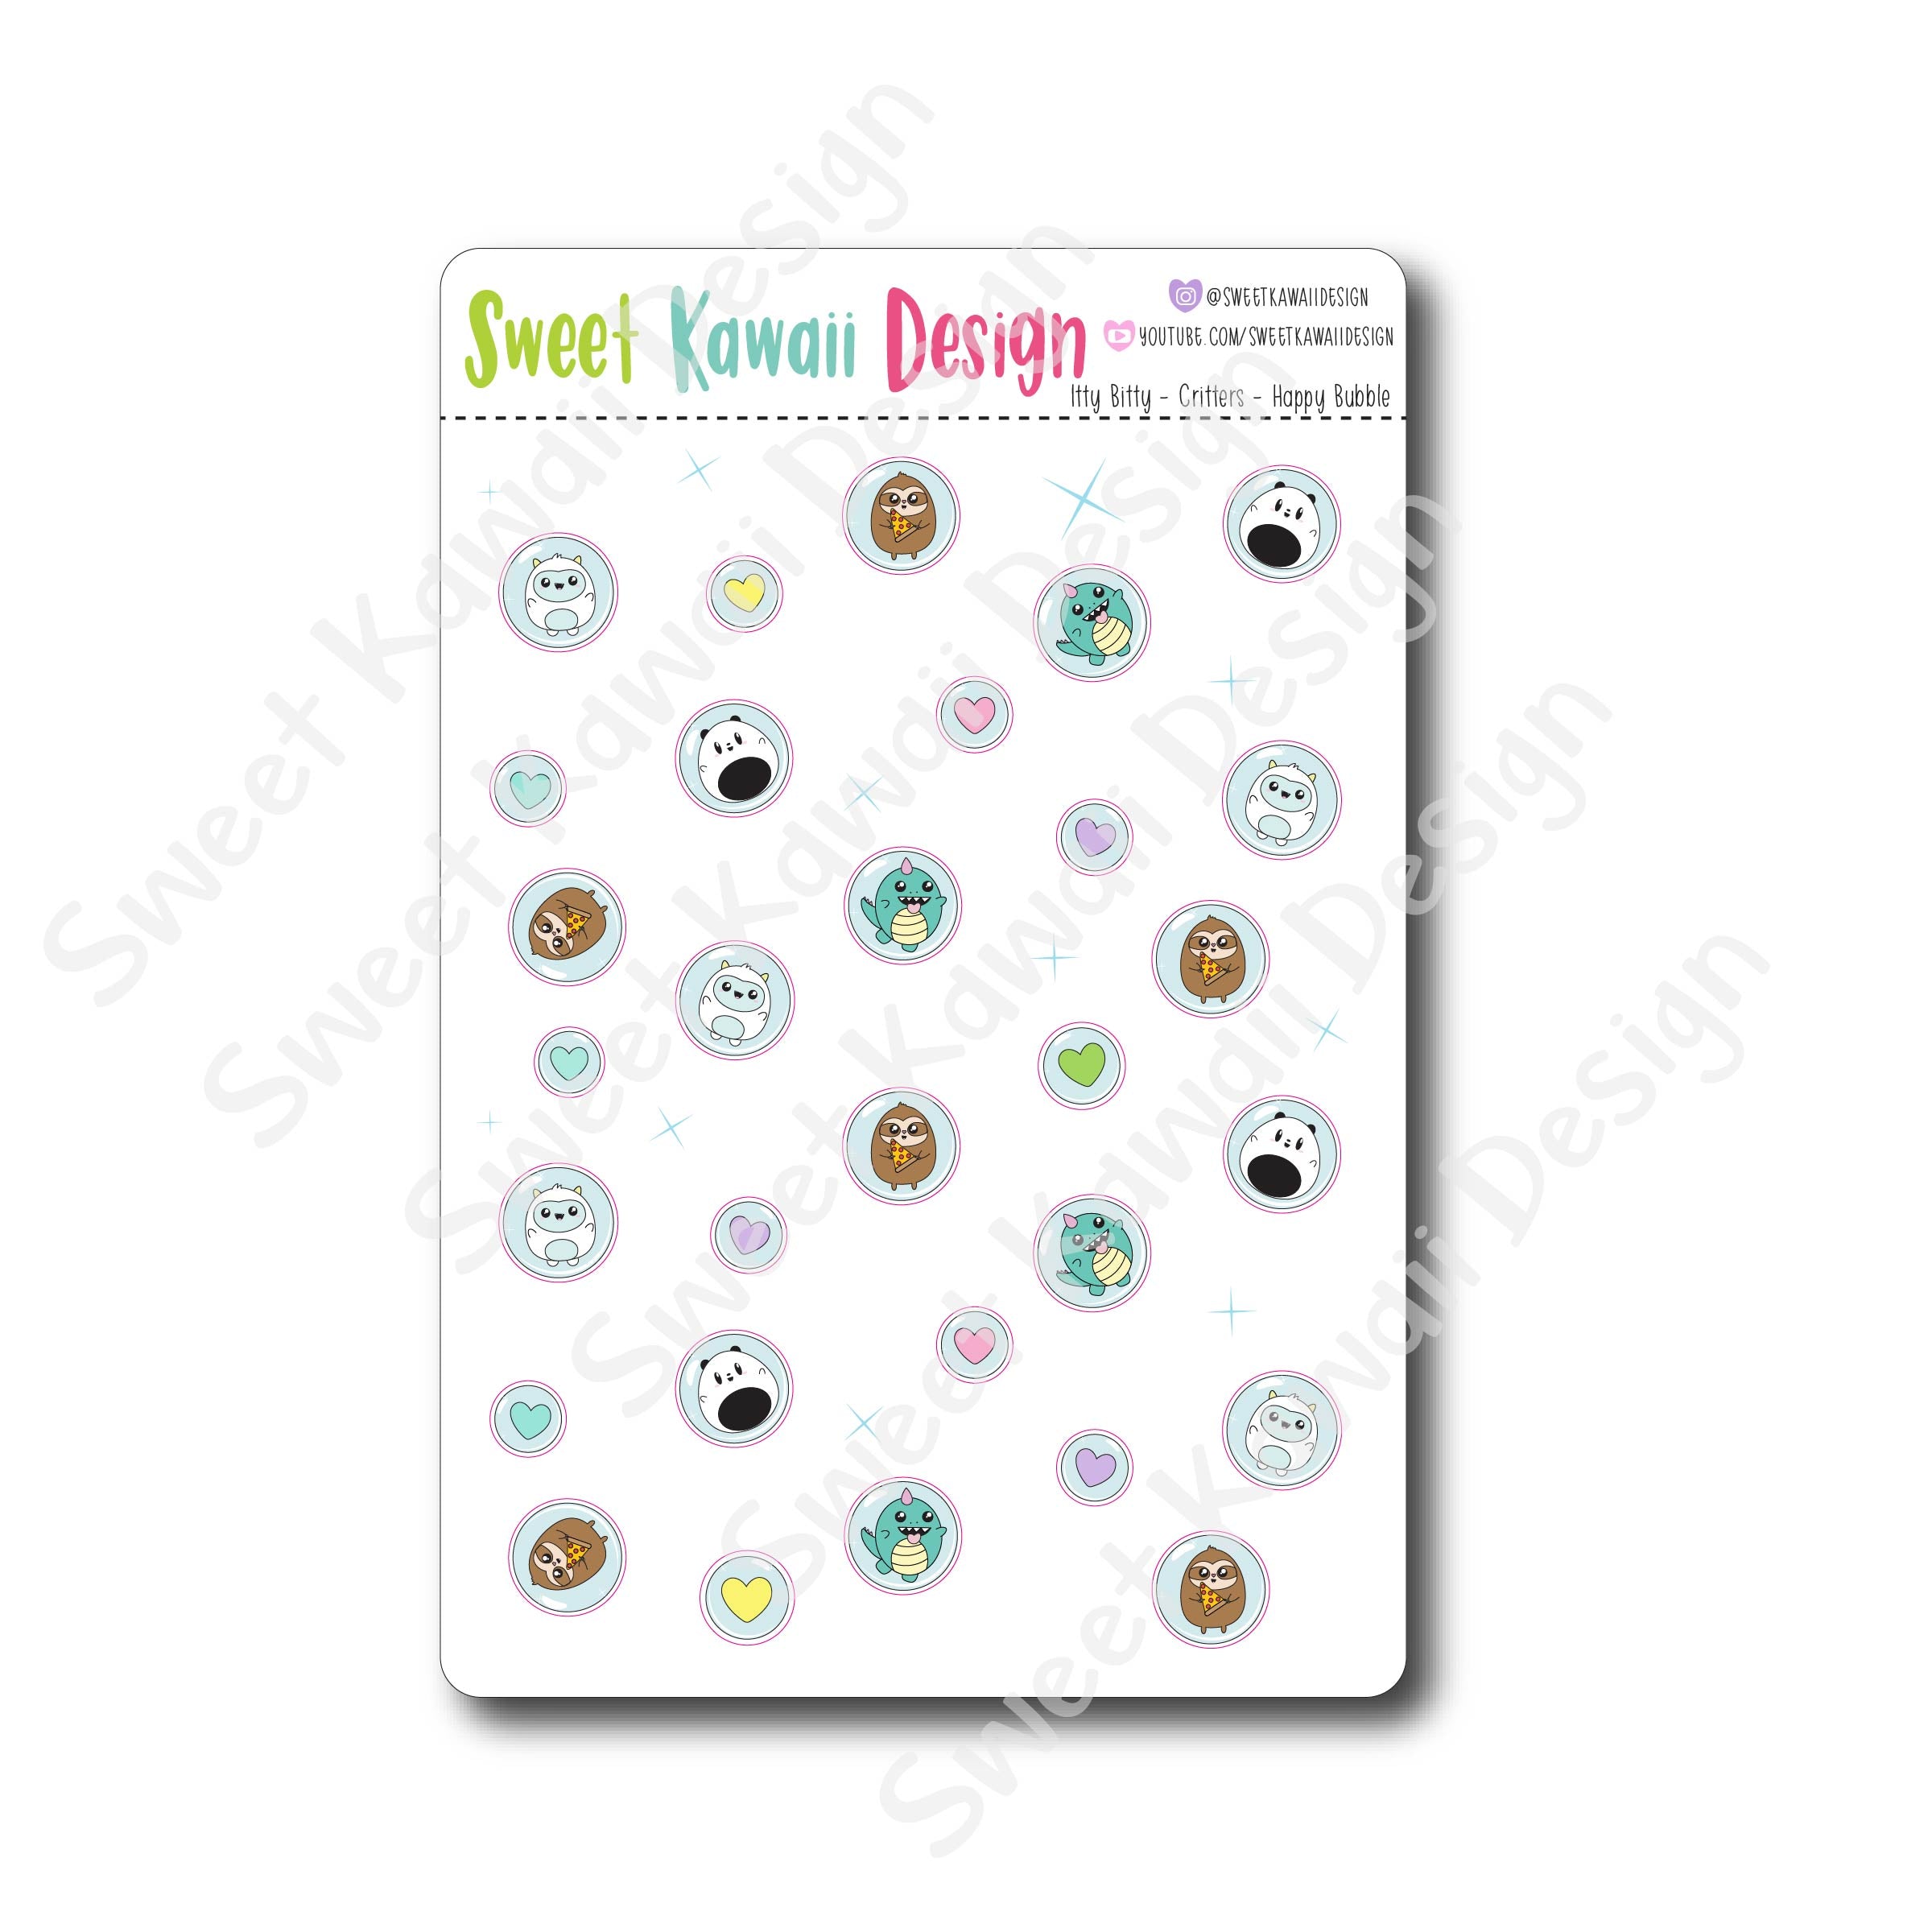 Kawaii Critters Stickers - Happy Bubbles